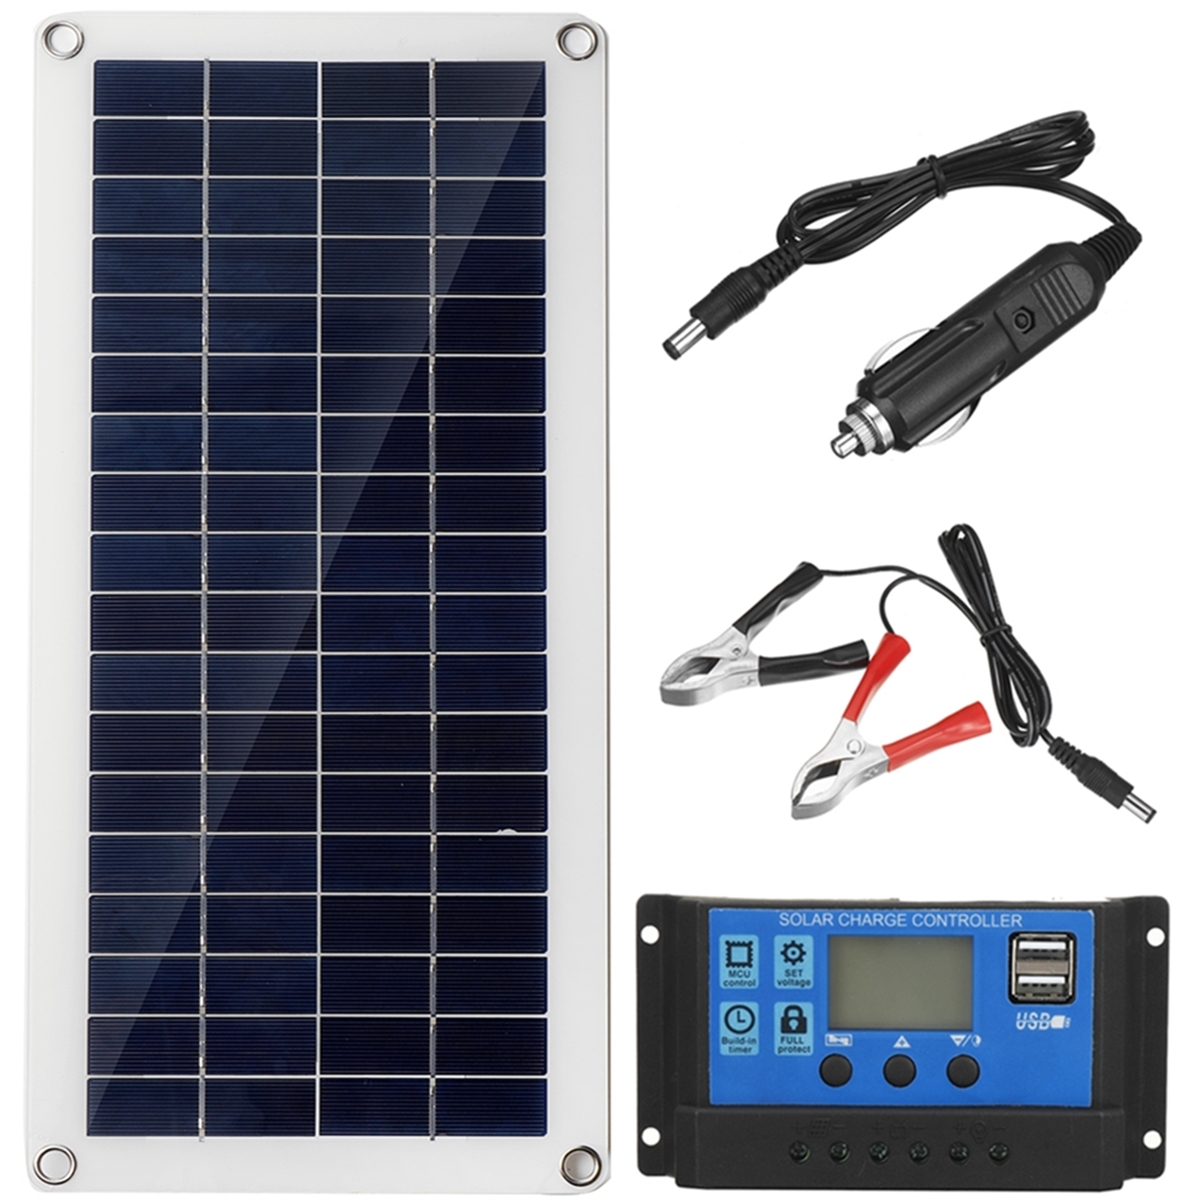 40W-12V-Solar-Panel-Kit-60A100A-Battery-Charger-Controller-Camping-RV-Caravan-Boat-1918504-1